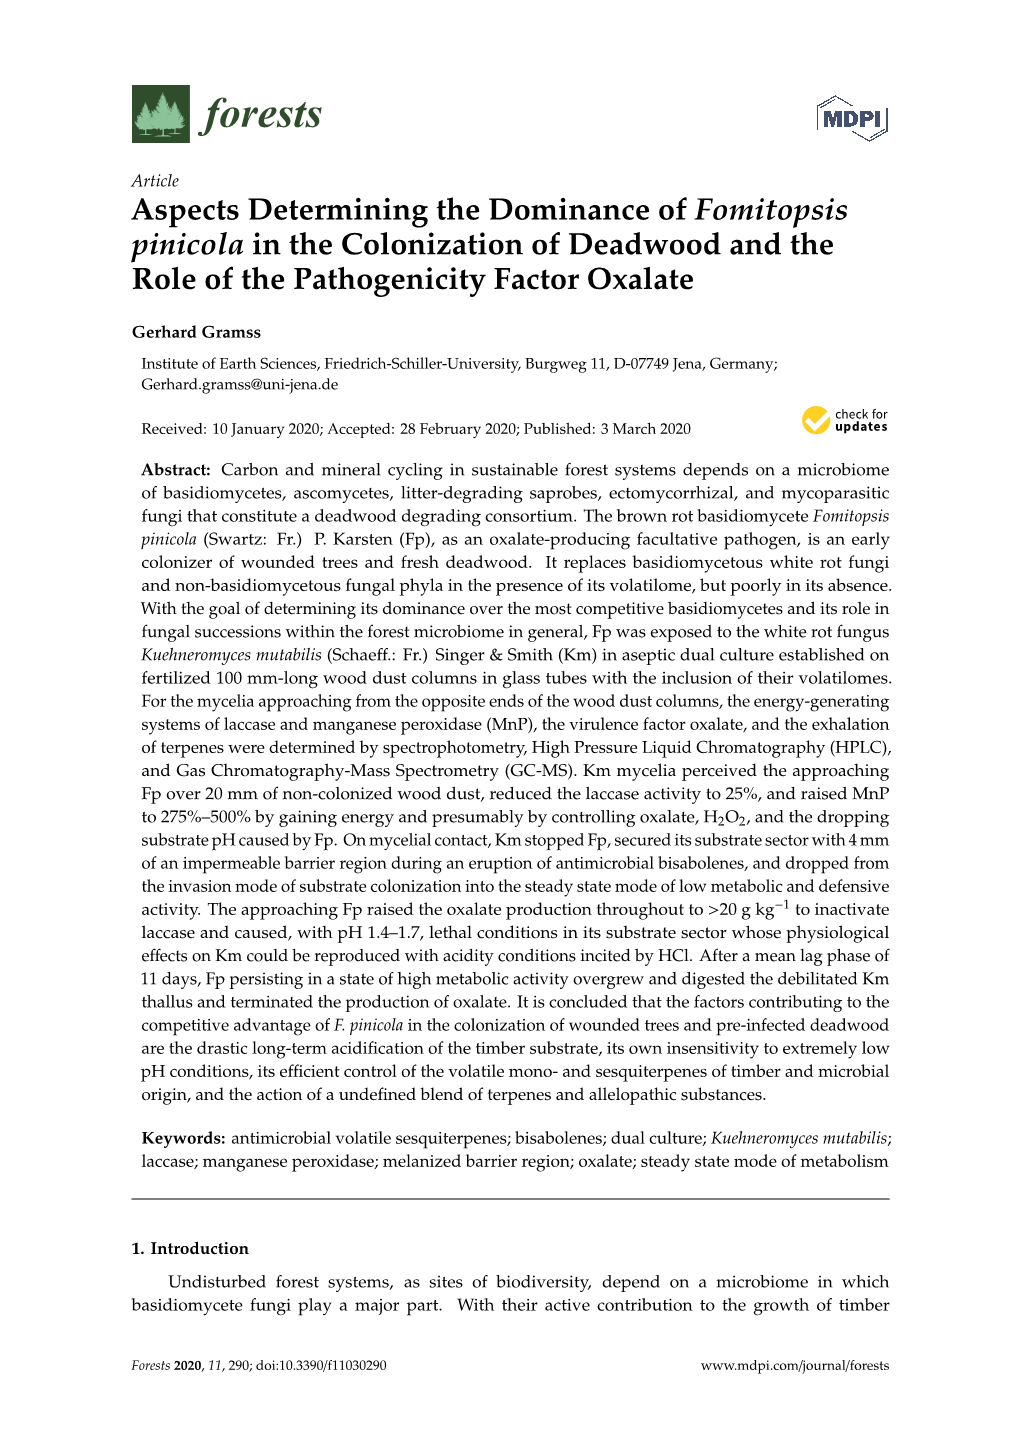 Aspects Determining the Dominance of Fomitopsis Pinicola in the Colonization of Deadwood and the Role of the Pathogenicity Factor Oxalate